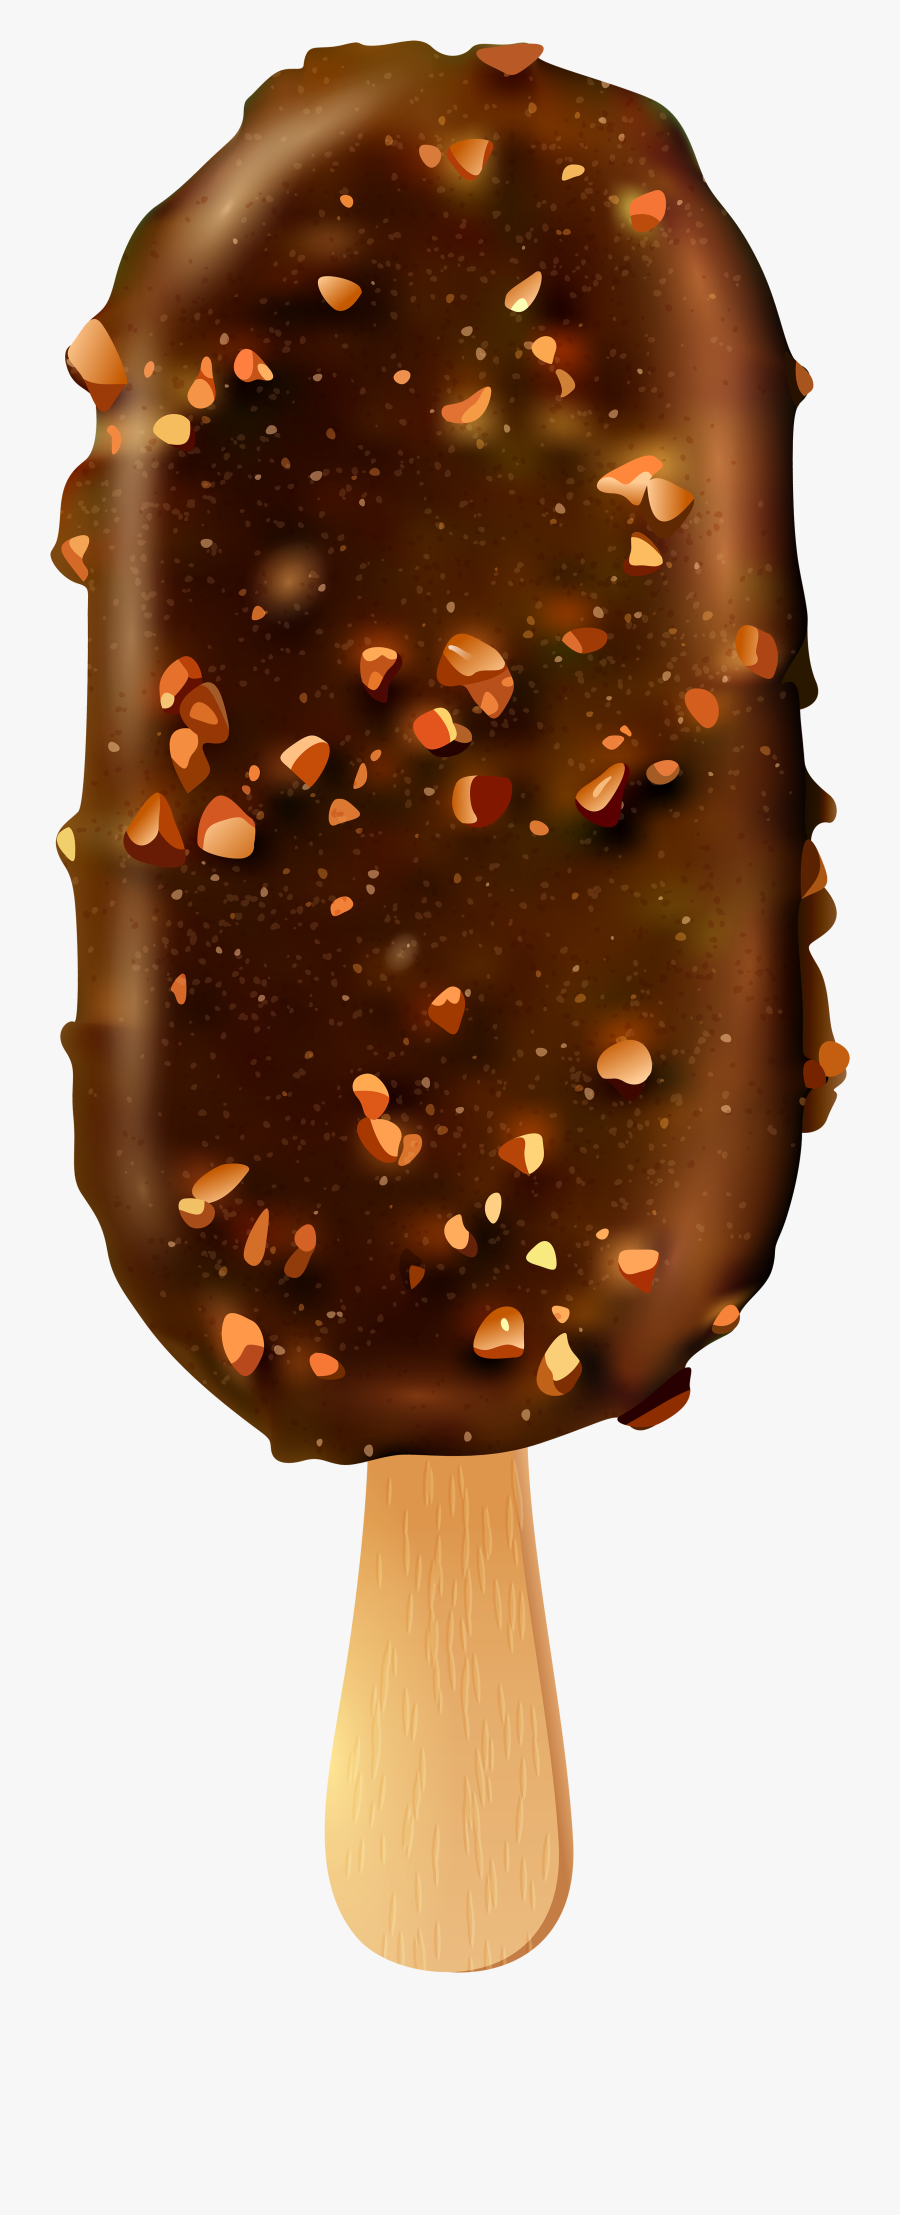 Ice Cream And Nuts Stick Png Clip Art - Chocolate Stick Ice Cream Png, Transparent Clipart